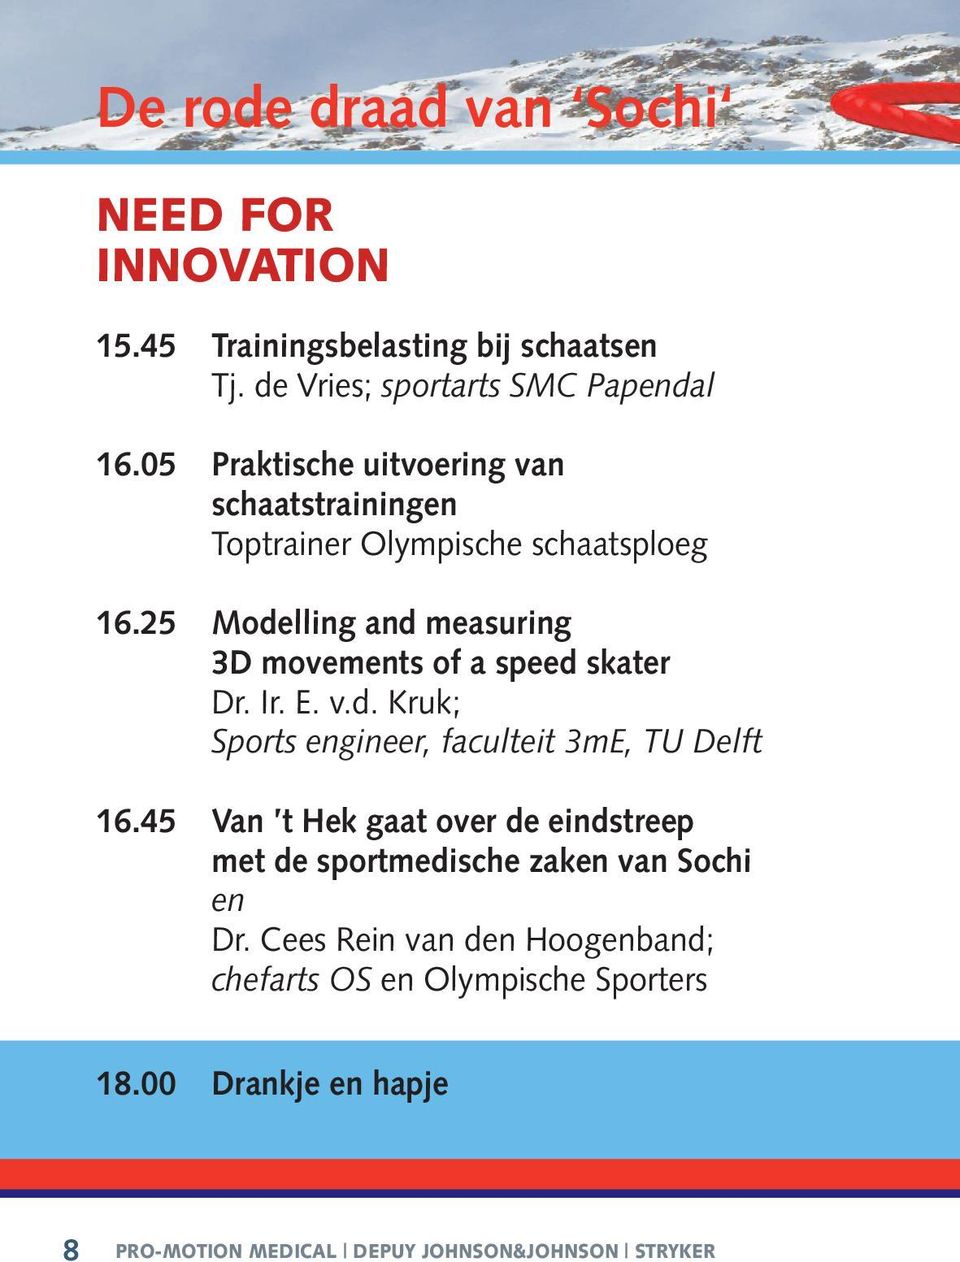 25 Modelling and measuring 3D movements of a speed skater Dr. Ir. E. v.d. Kruk; Sports engineer, faculteit 3mE, TU Delft 16.